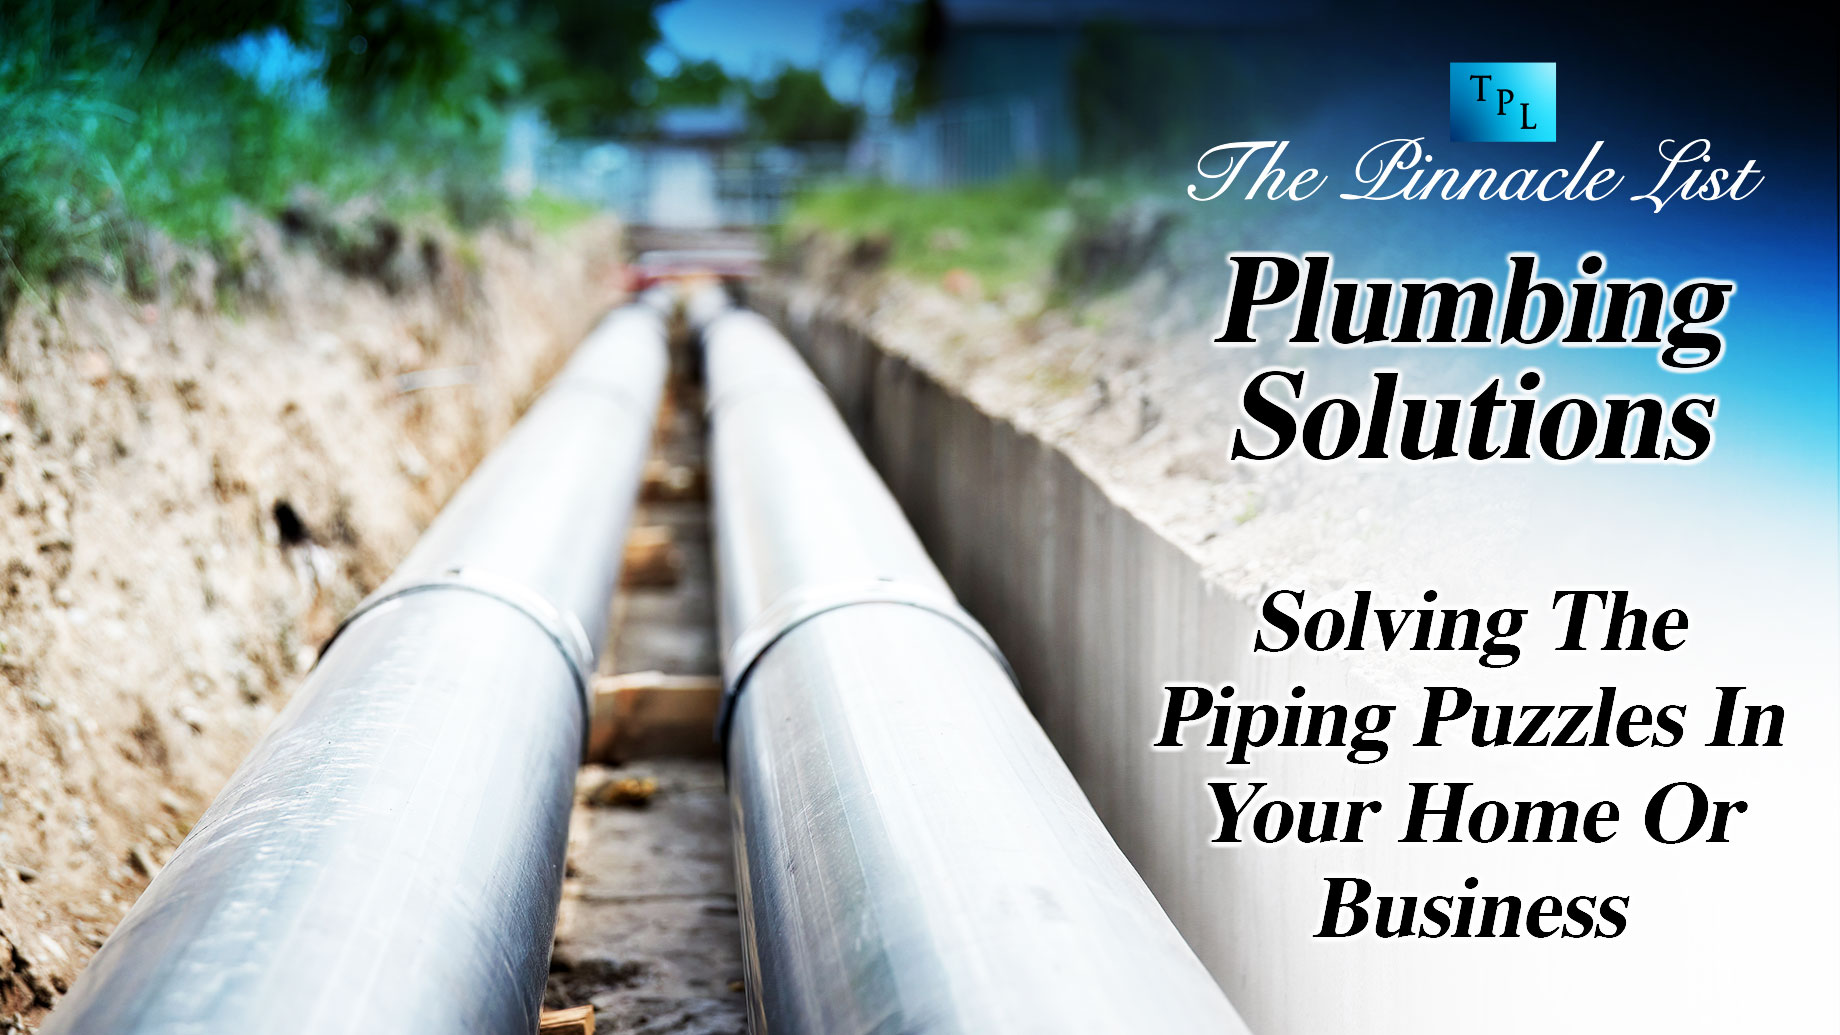 Plumbing Solutions: Solving The Piping Puzzles In Your Home Or Business